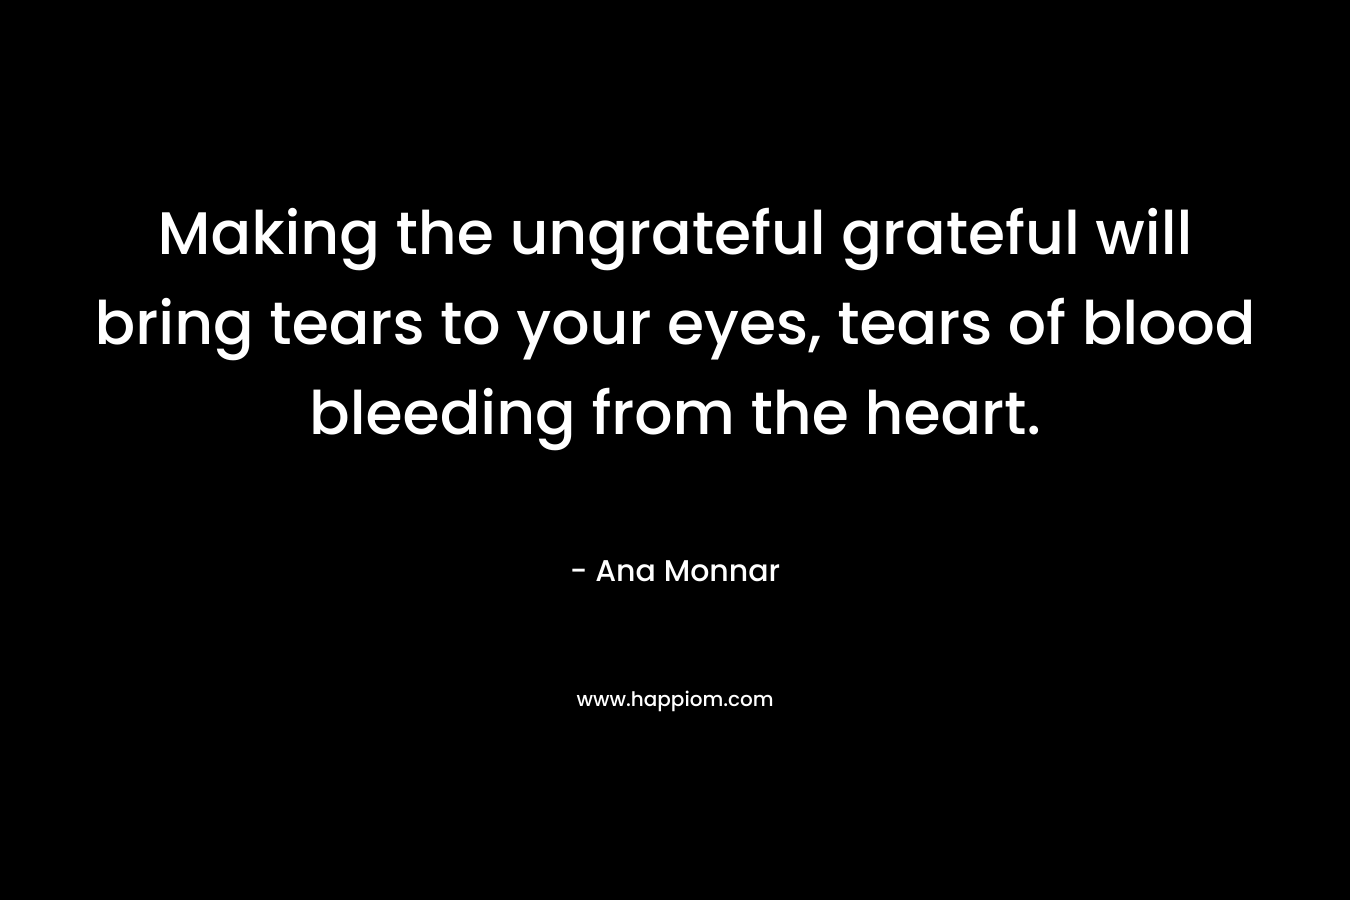 Making the ungrateful grateful will bring tears to your eyes, tears of blood bleeding from the heart.